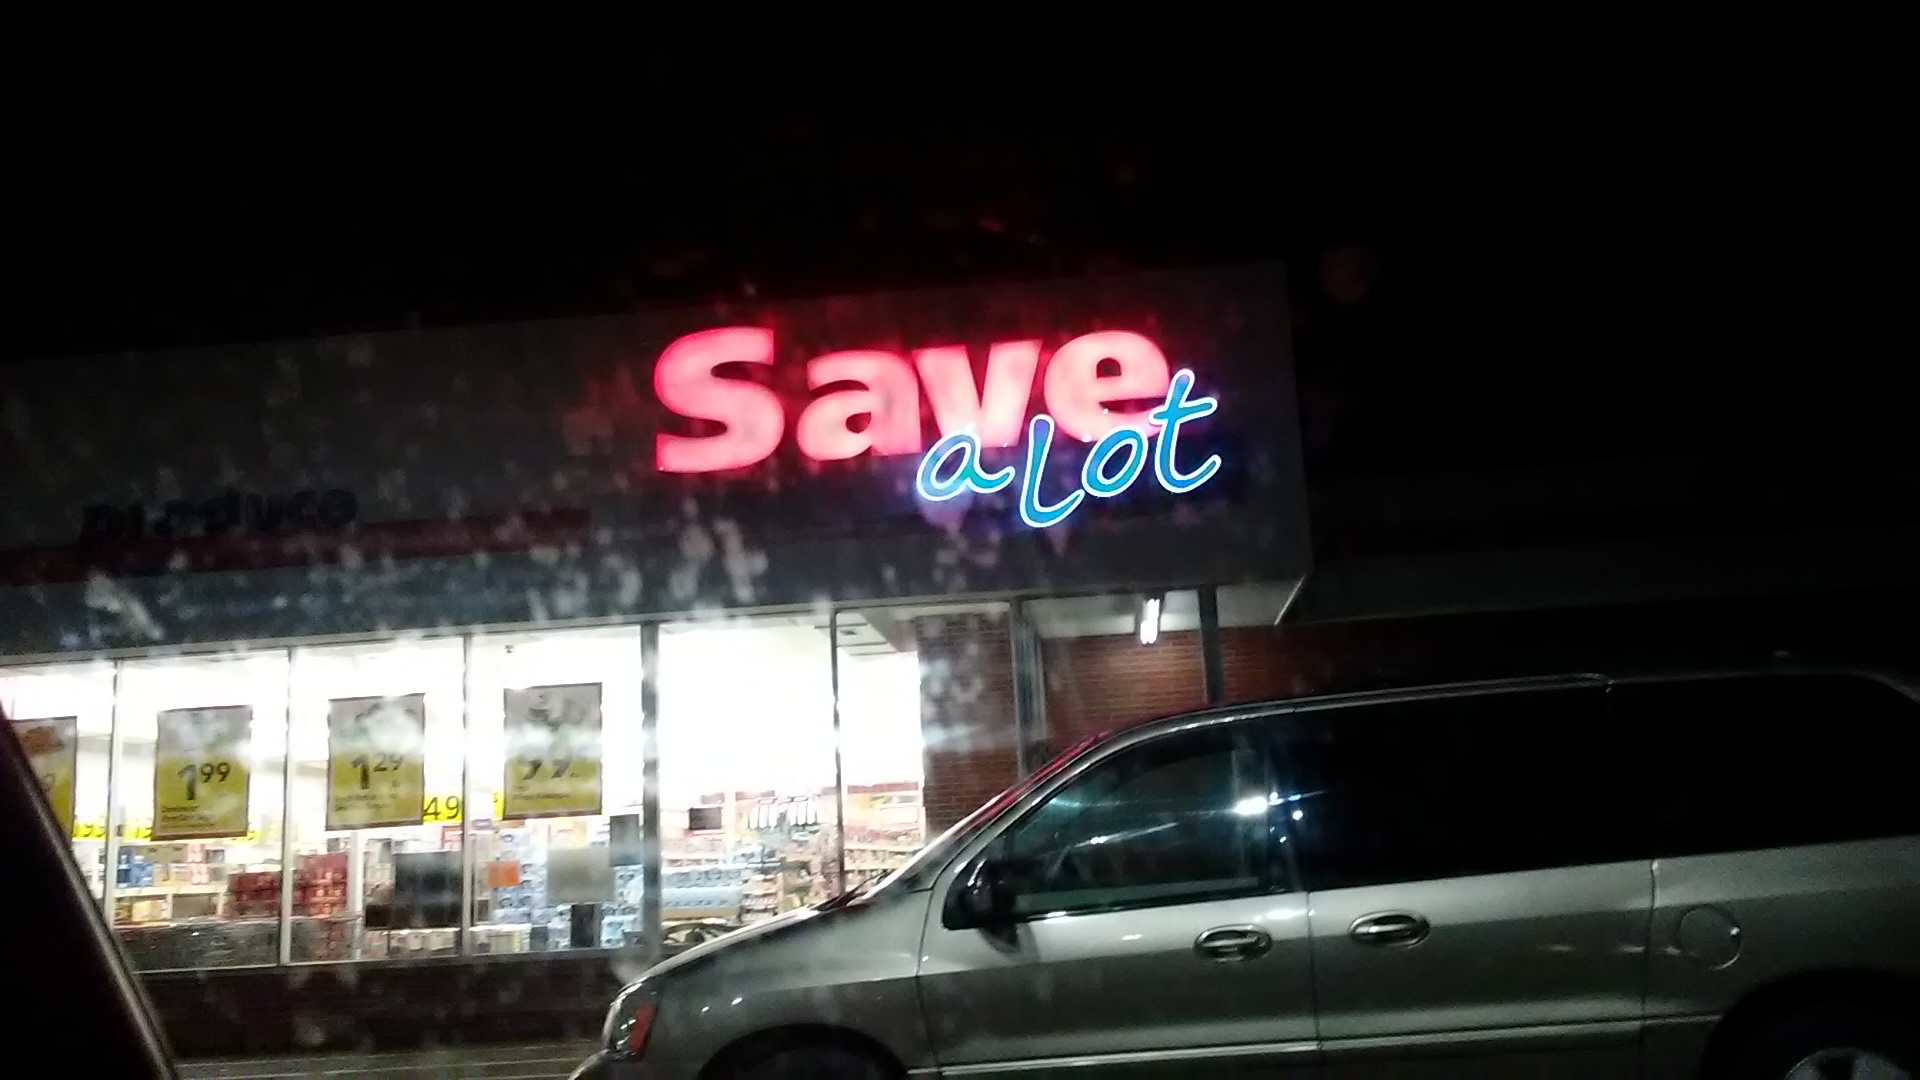 Save A Lot